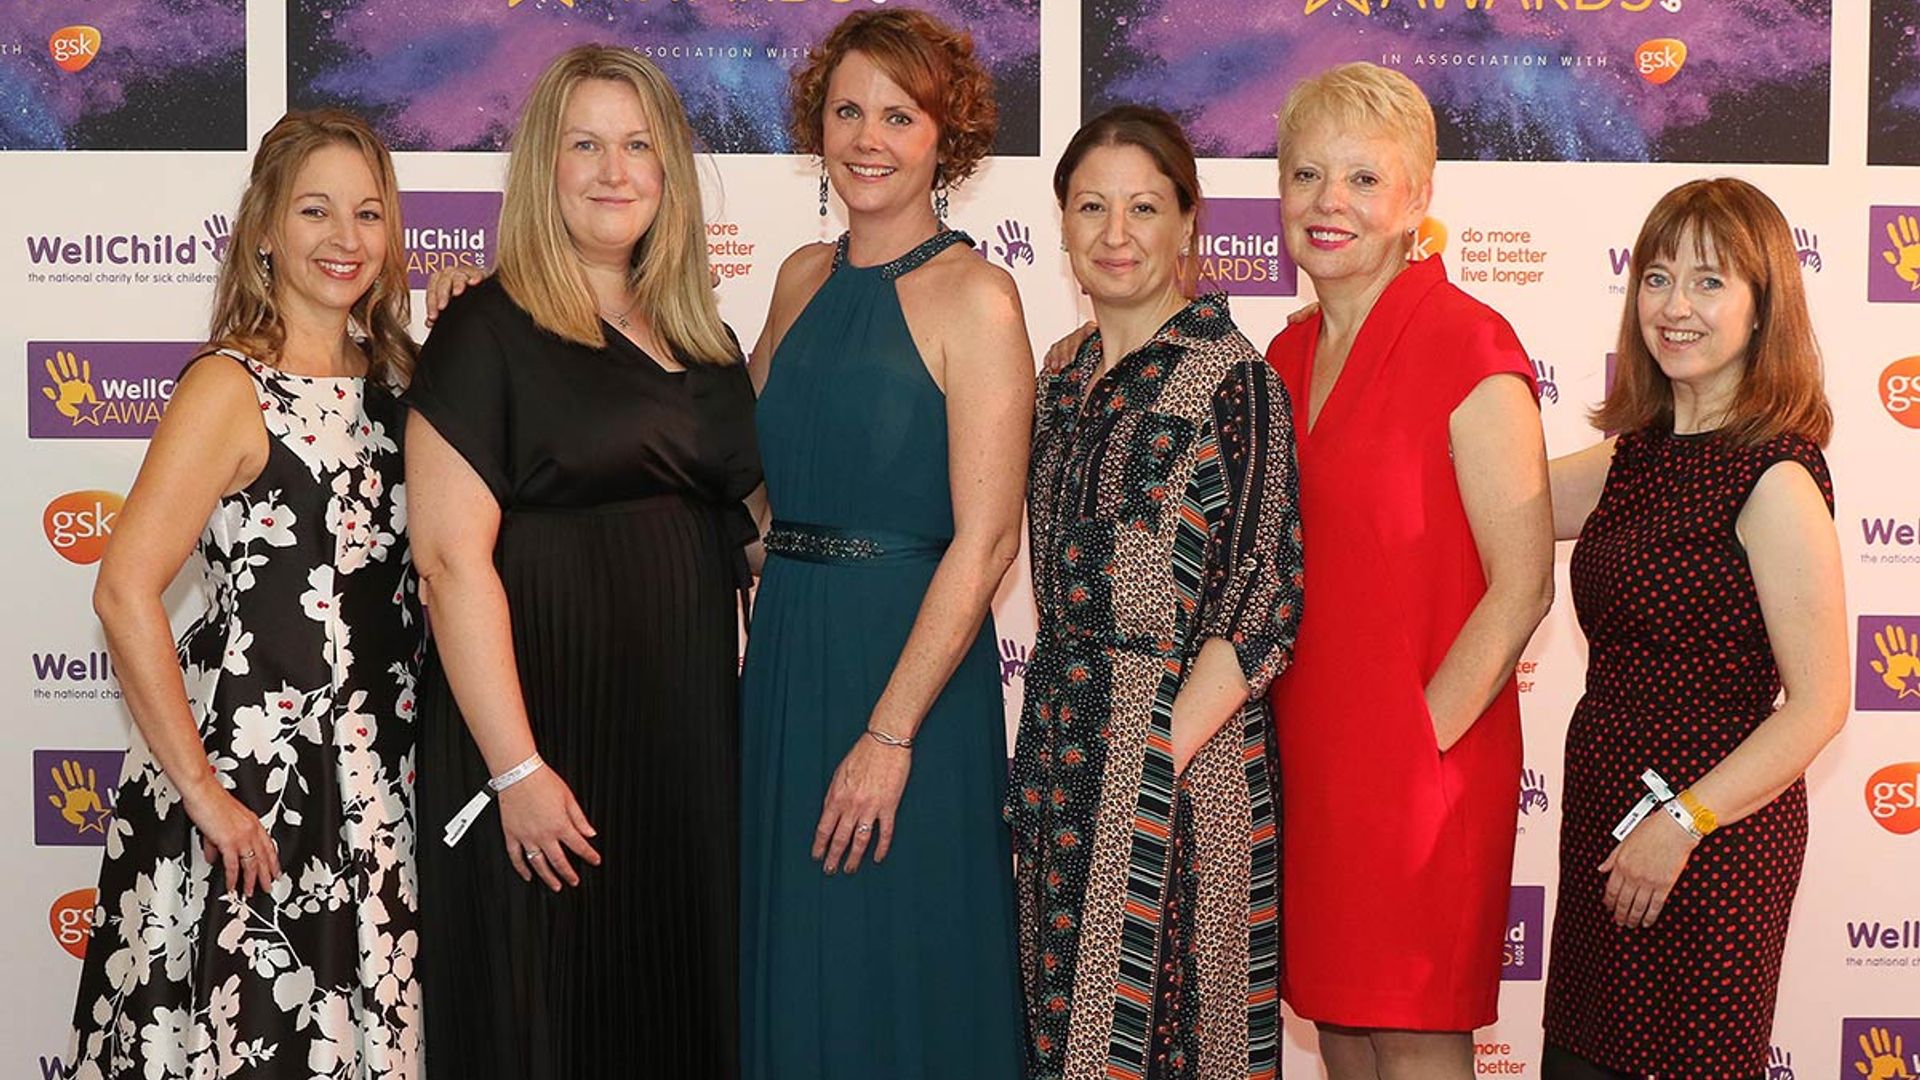 Meet the Community of the Year winners at HELLO!'s Star Women Awards